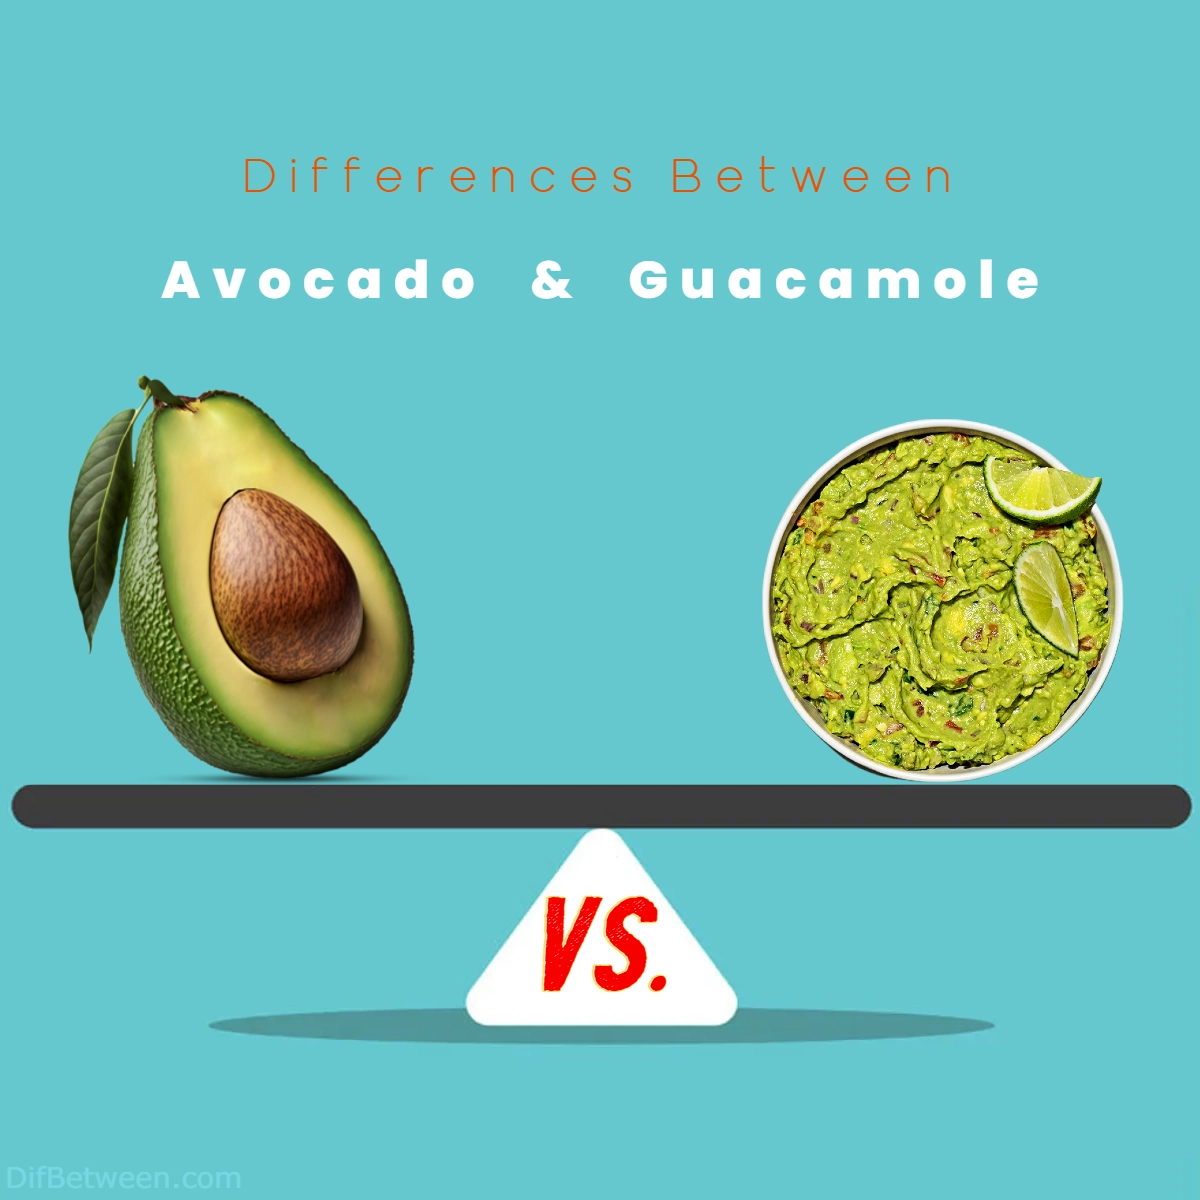 Difference Between Avocado and Guacamole